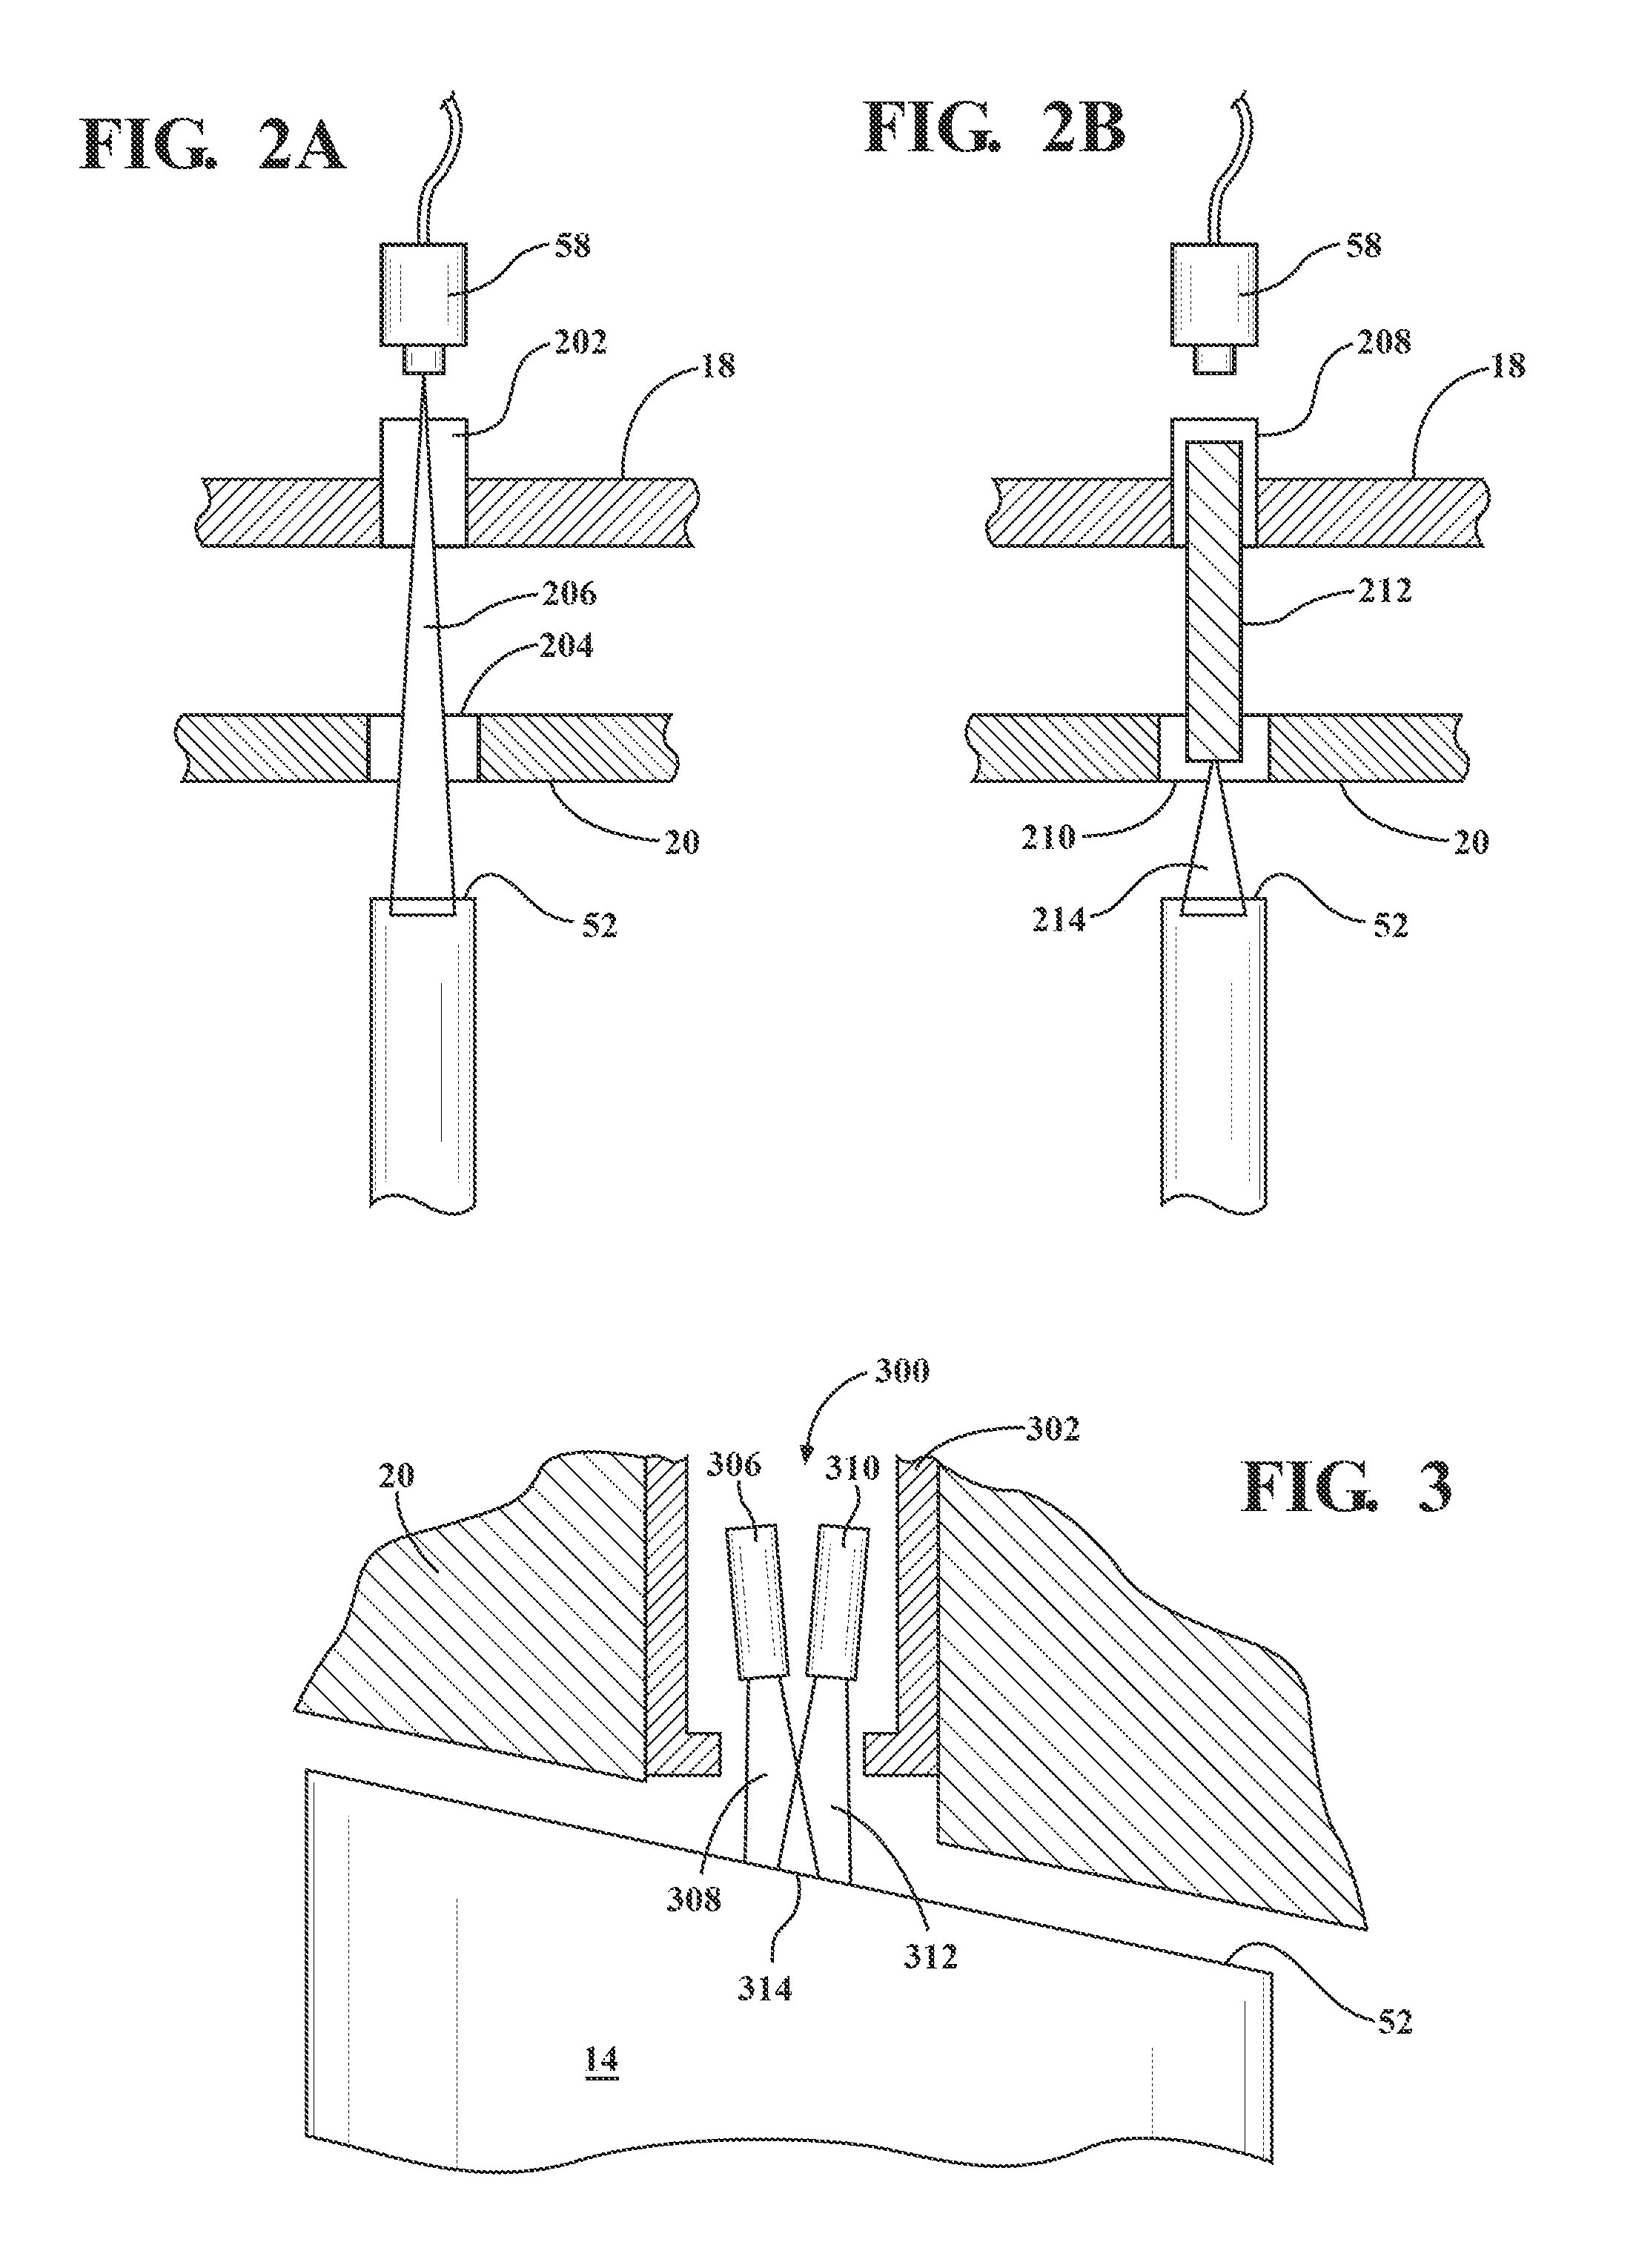 Method of determining the location of tip timing sensors during operation